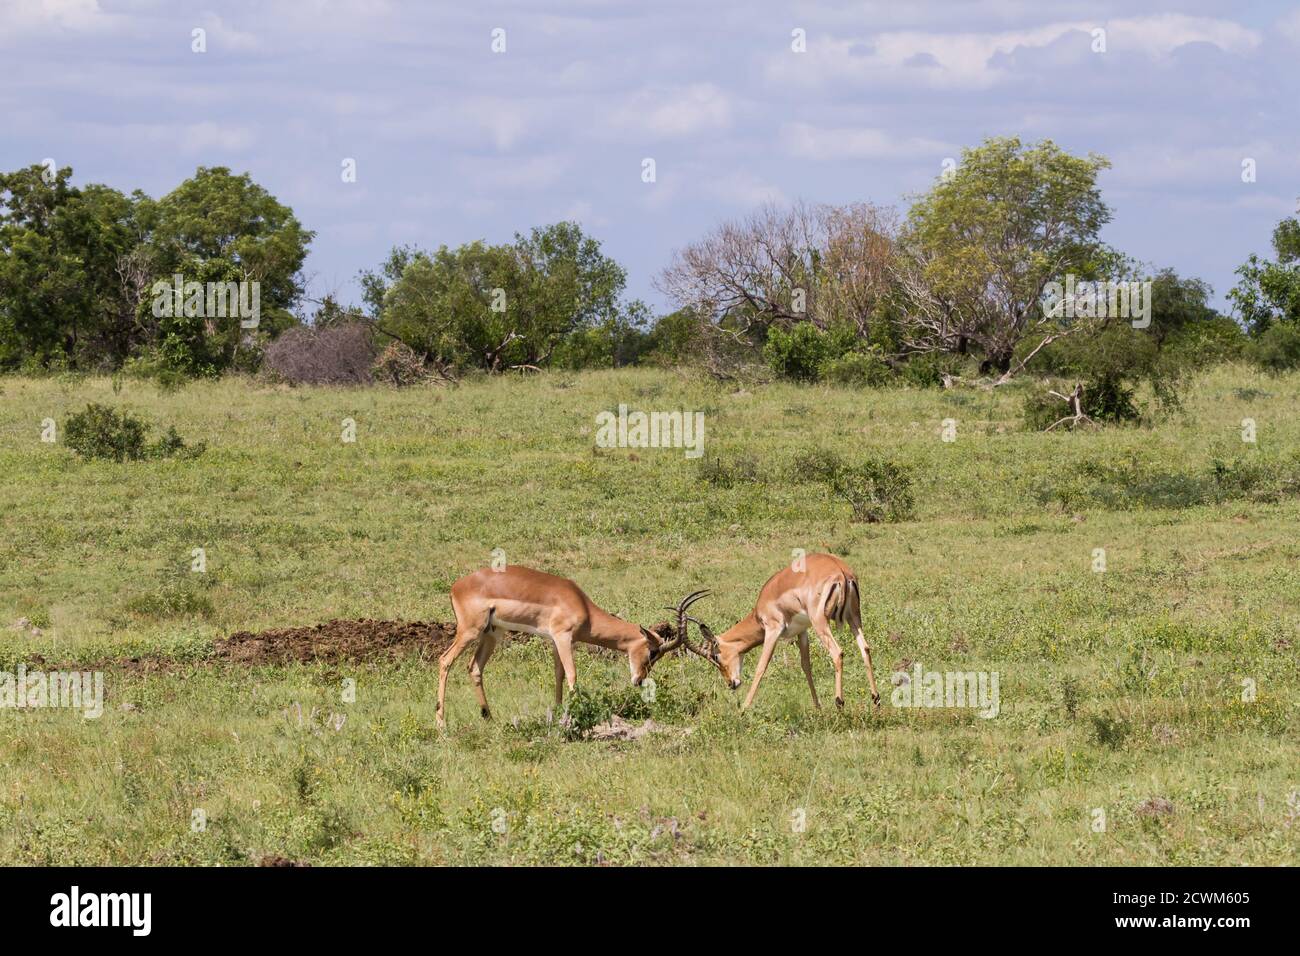 Male impala (Aepyceros melampus) rams fighting for dominance and locking horns during rutting season in Kruger National Park, South Africa Stock Photo